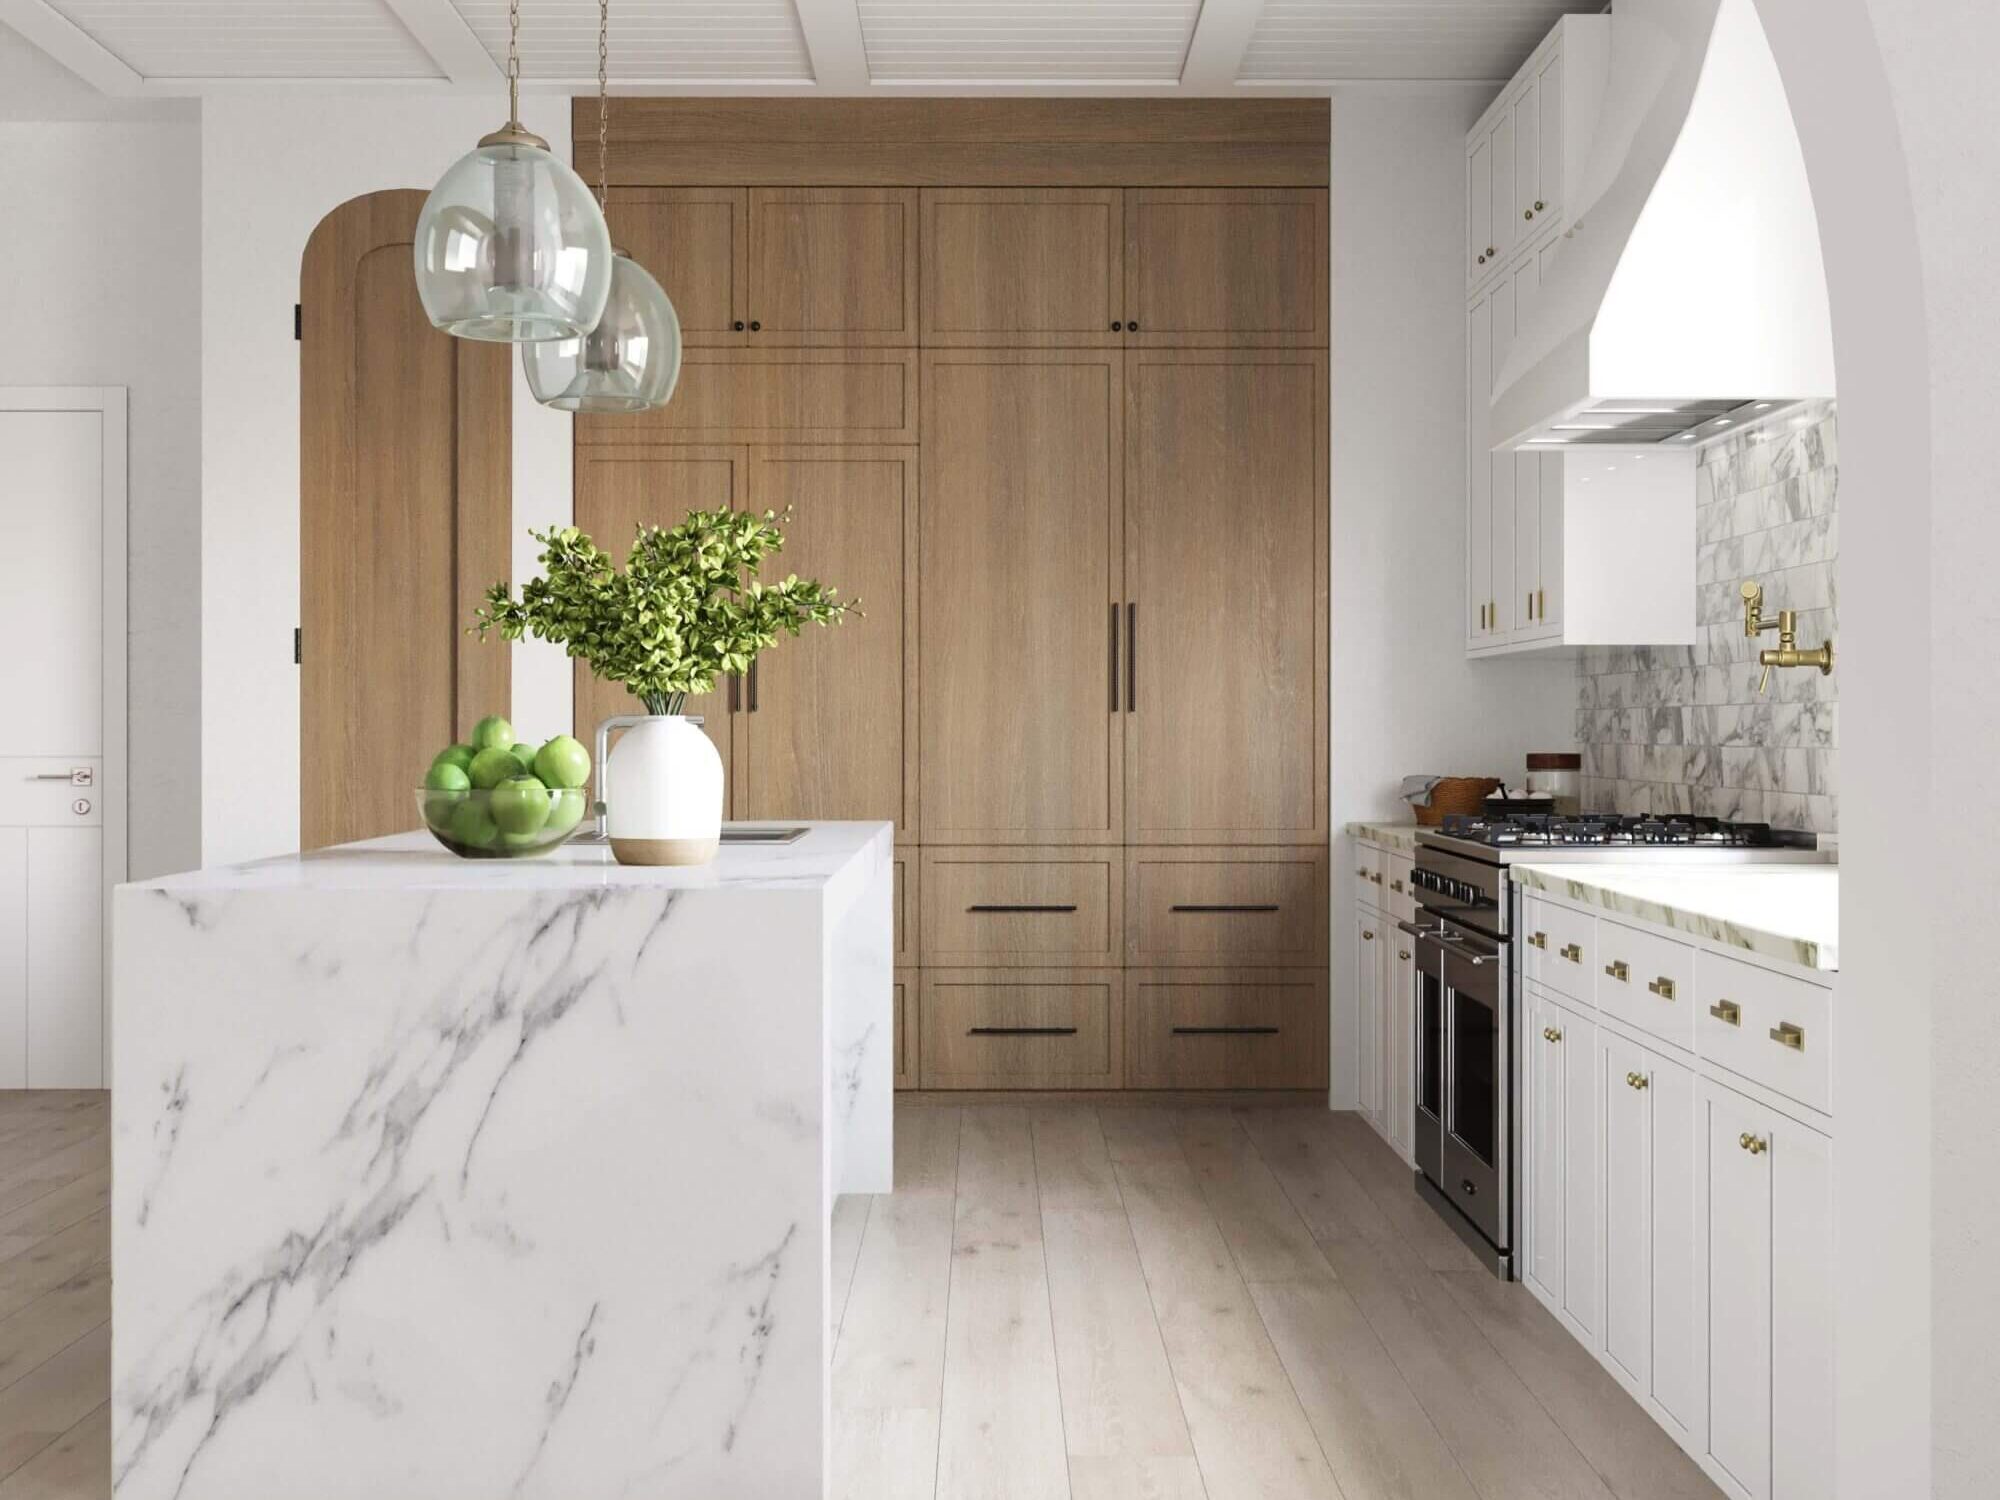 Cork Wood XP designer flooring by Torlys, shown here in a modern kitchen with wood cabinets and a marble island